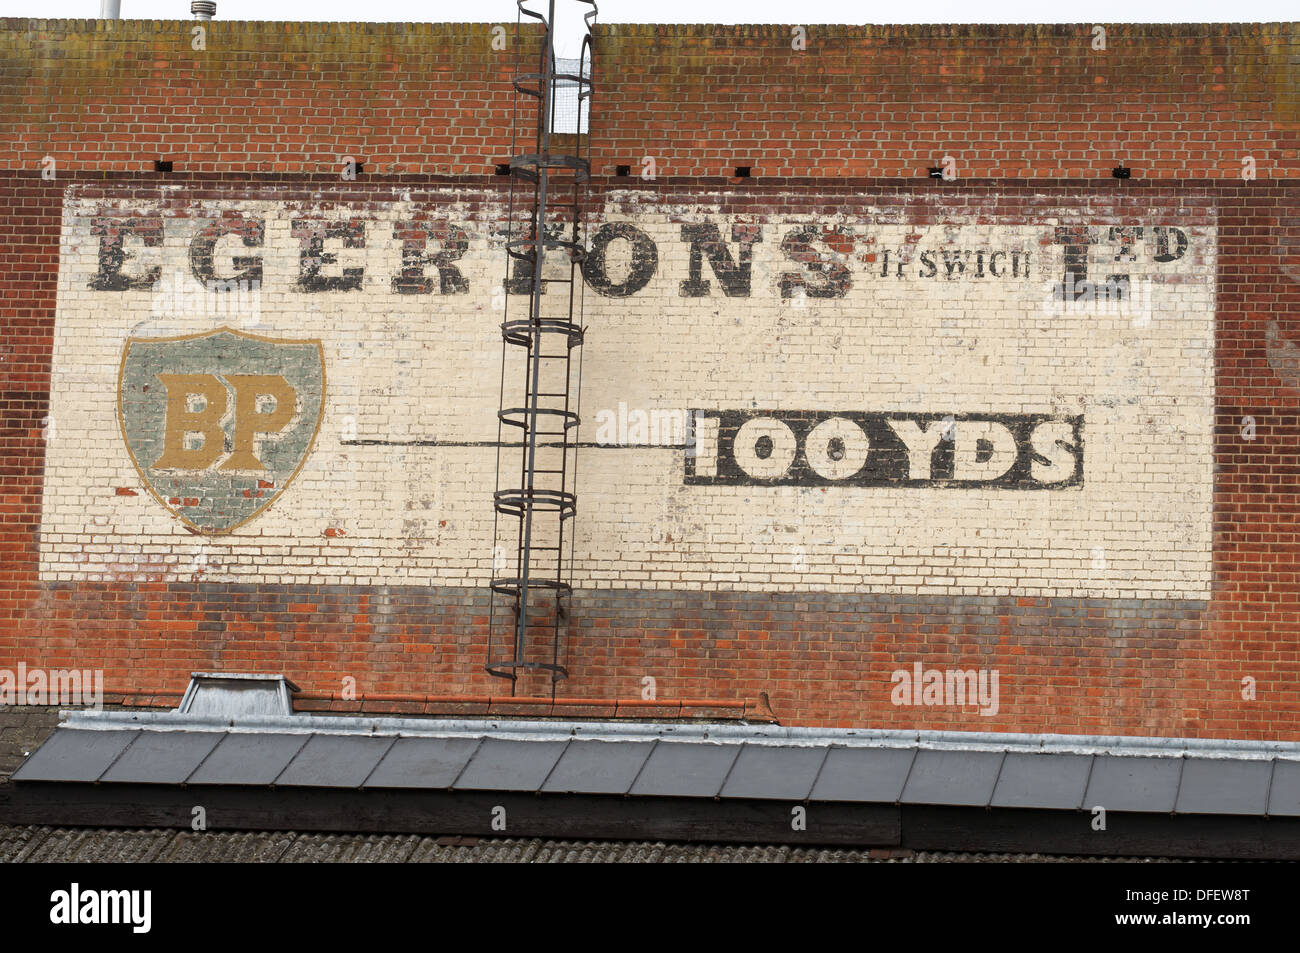 Advert painted on a brick wall Stock Photo